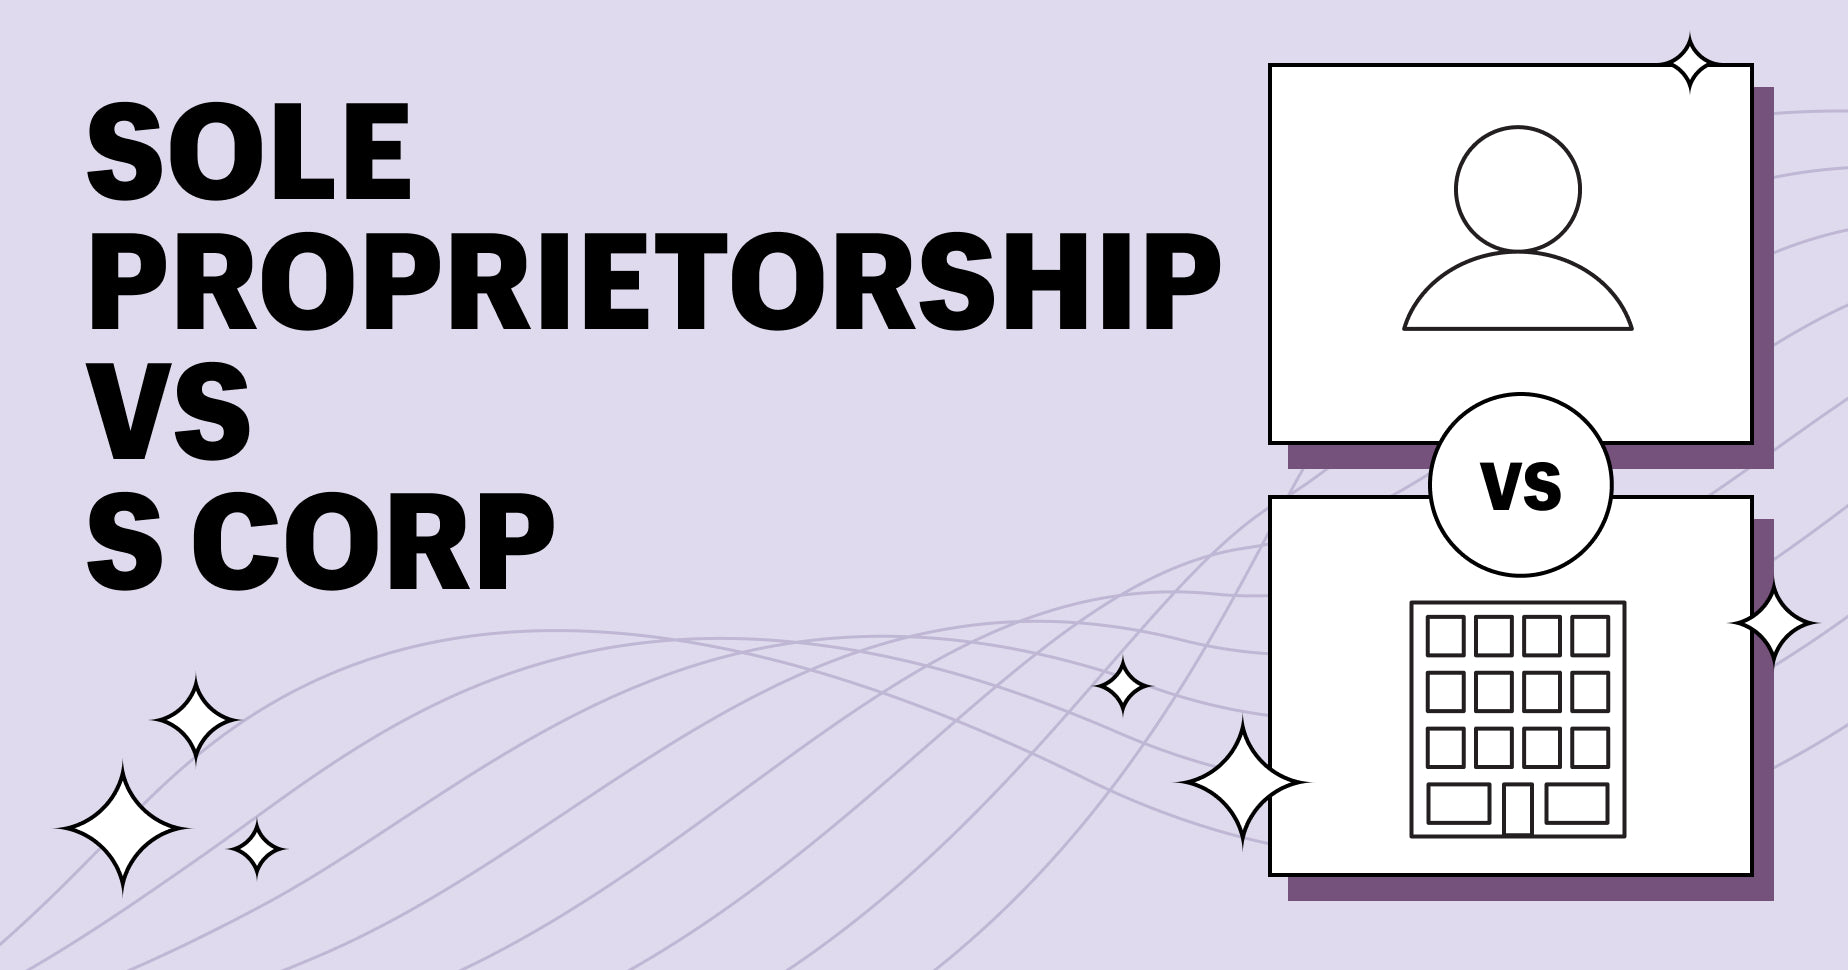 Light purple background with black text that says "sole proprietorship vs. s corp" along with vector diagrams of a building and a person